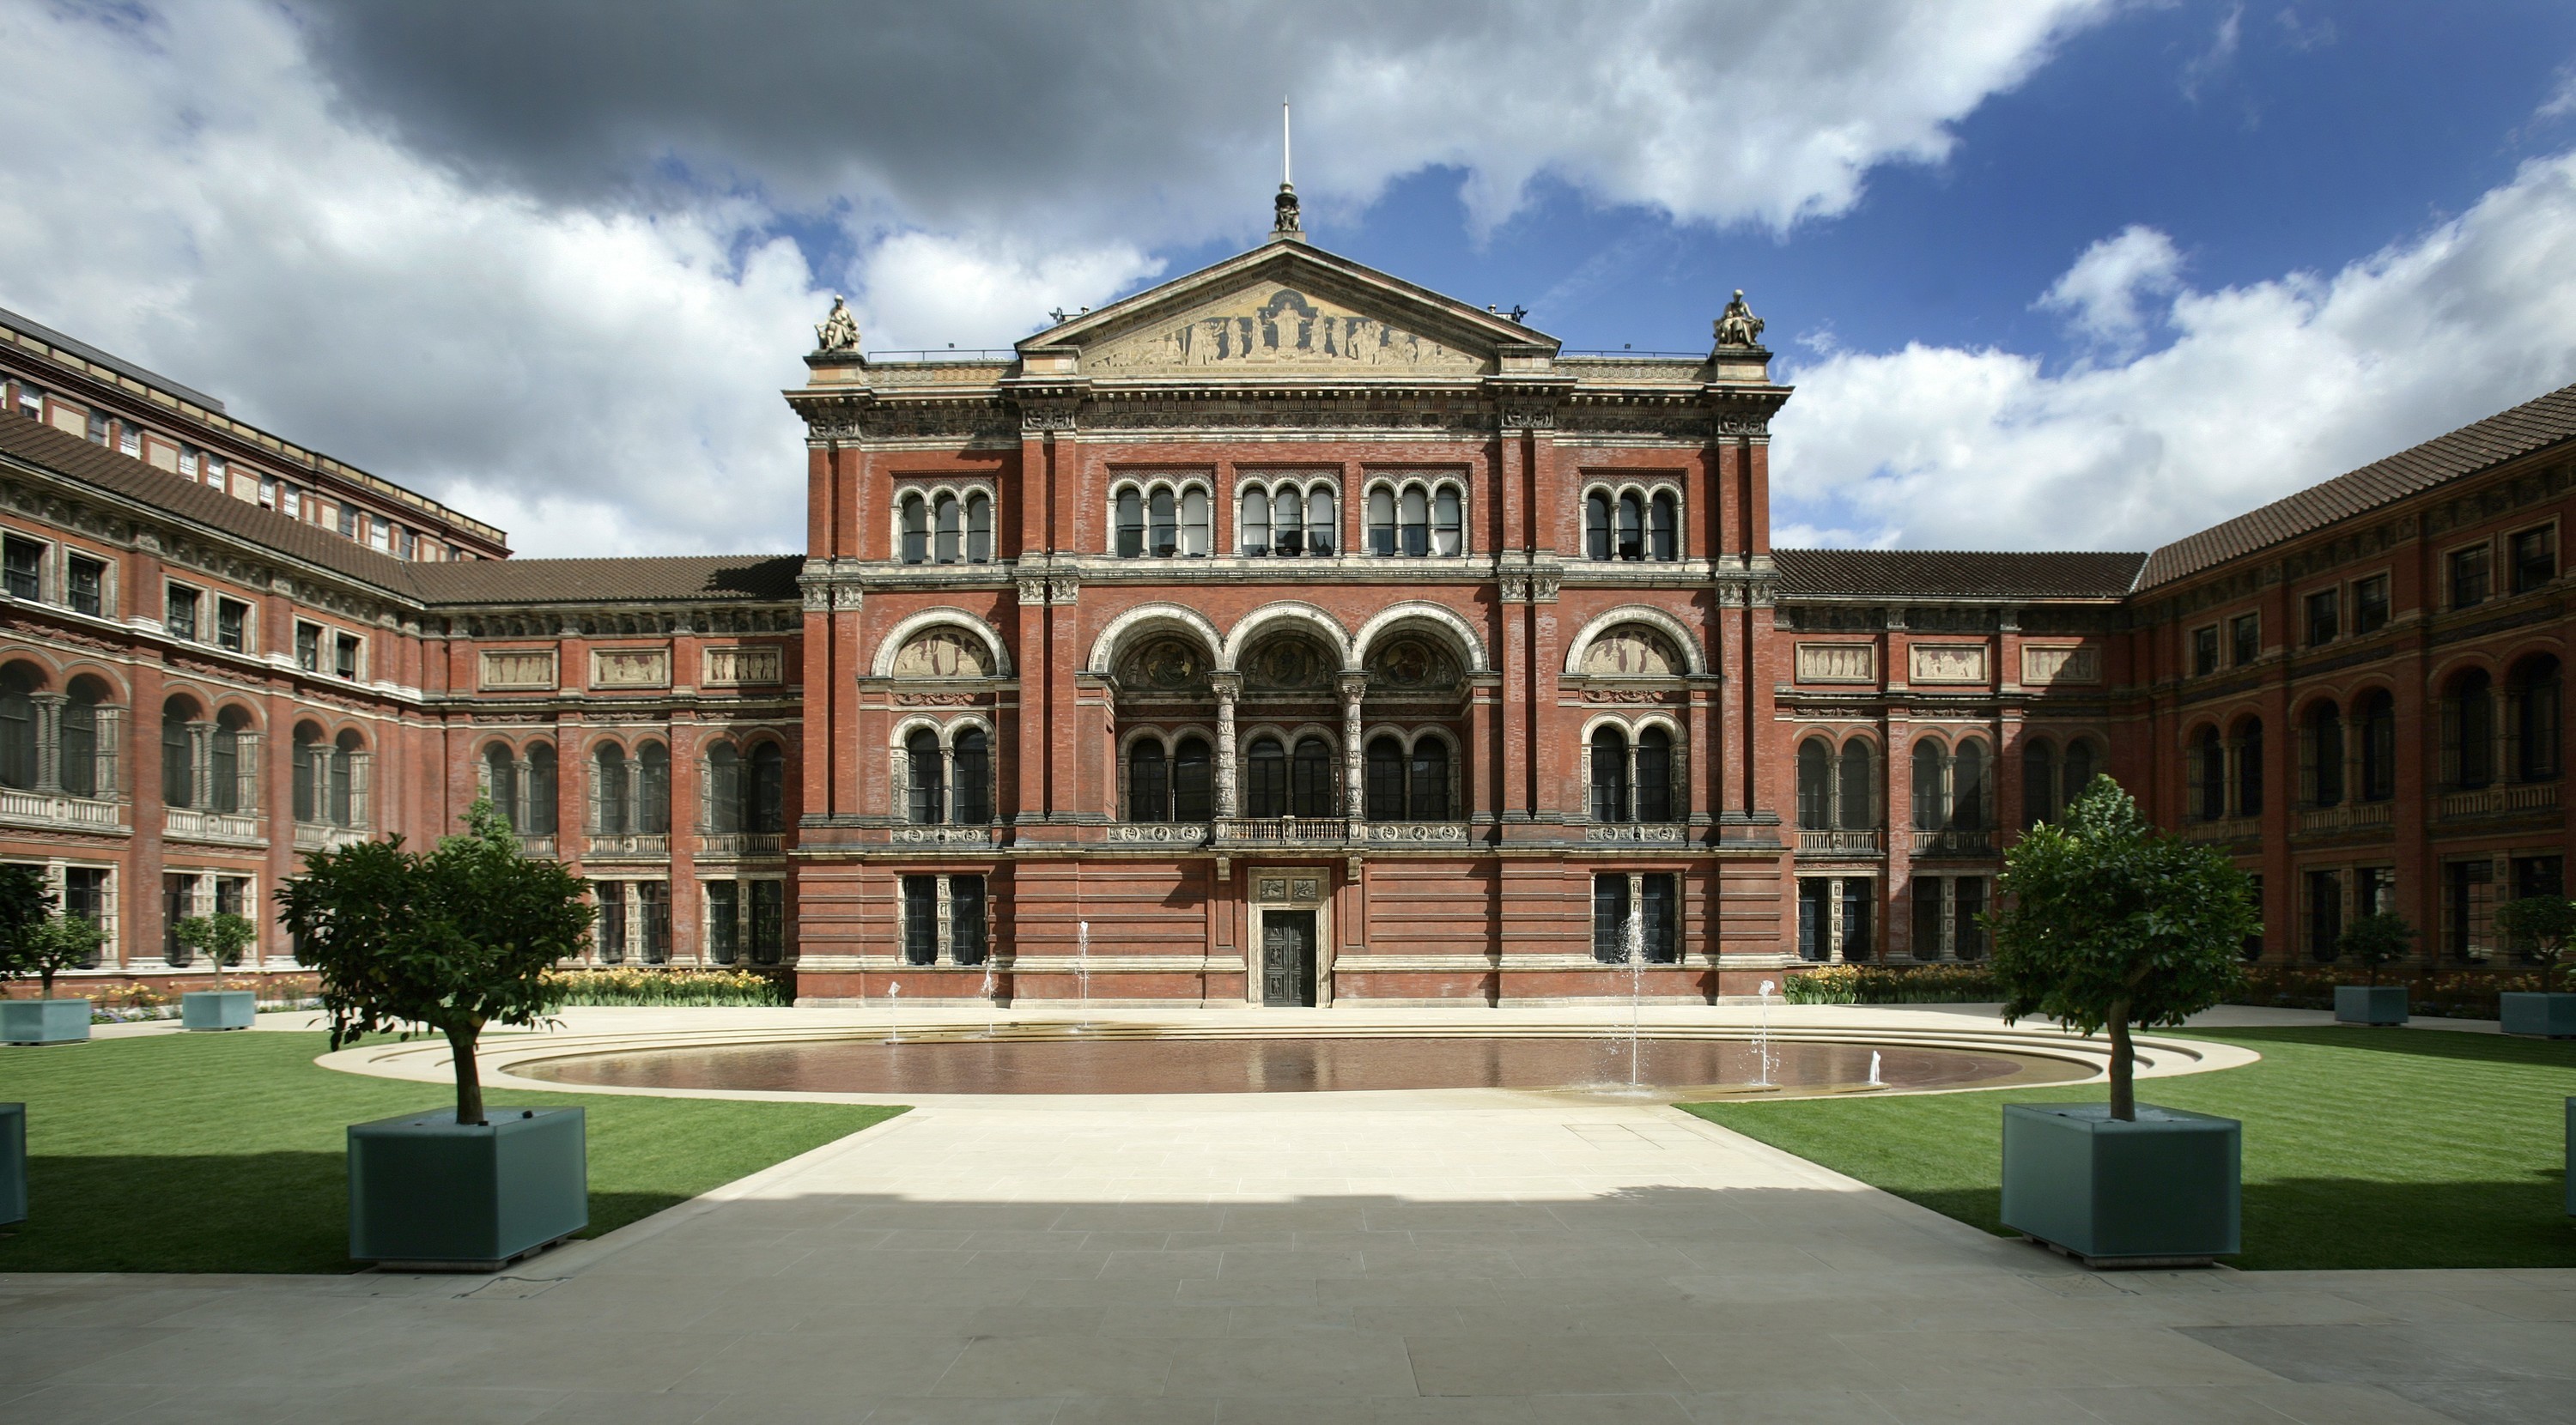 10 things to see at the Victoria and Albert Museum - You in London